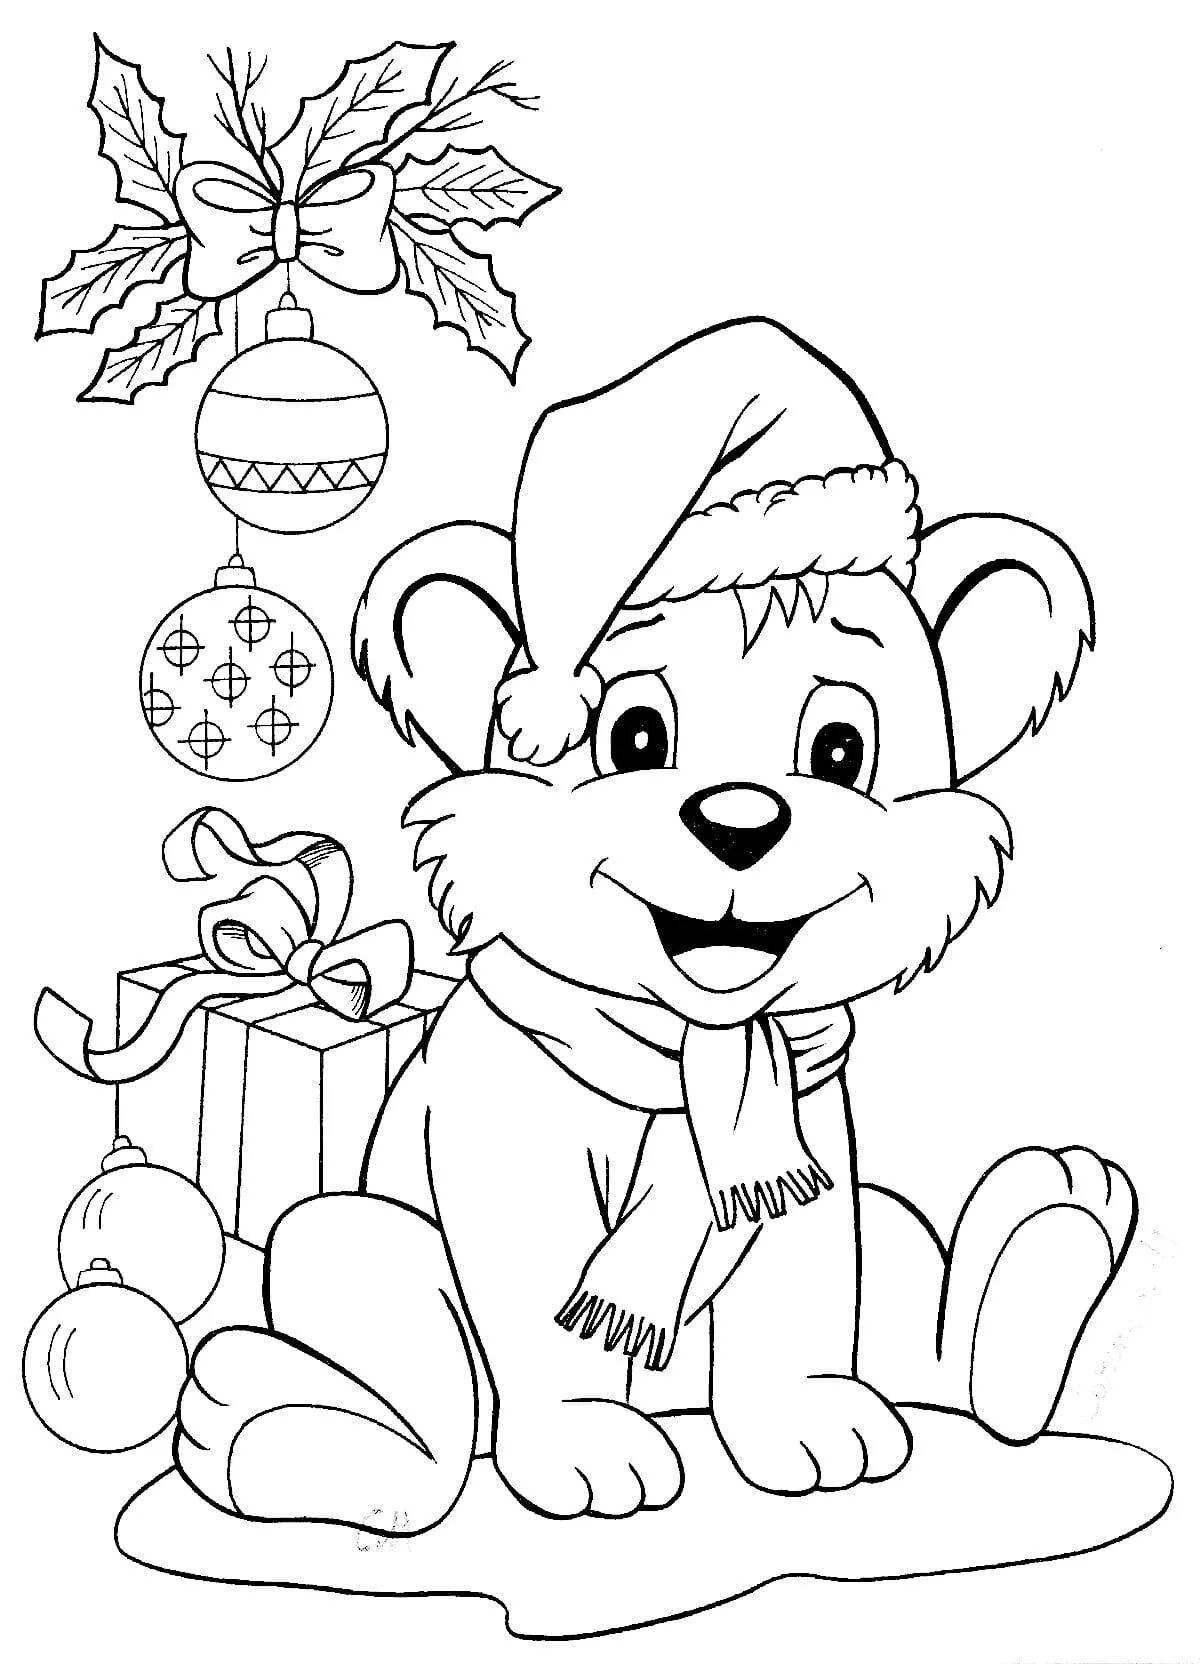 Bright Christmas coloring book for children 6-7 years old